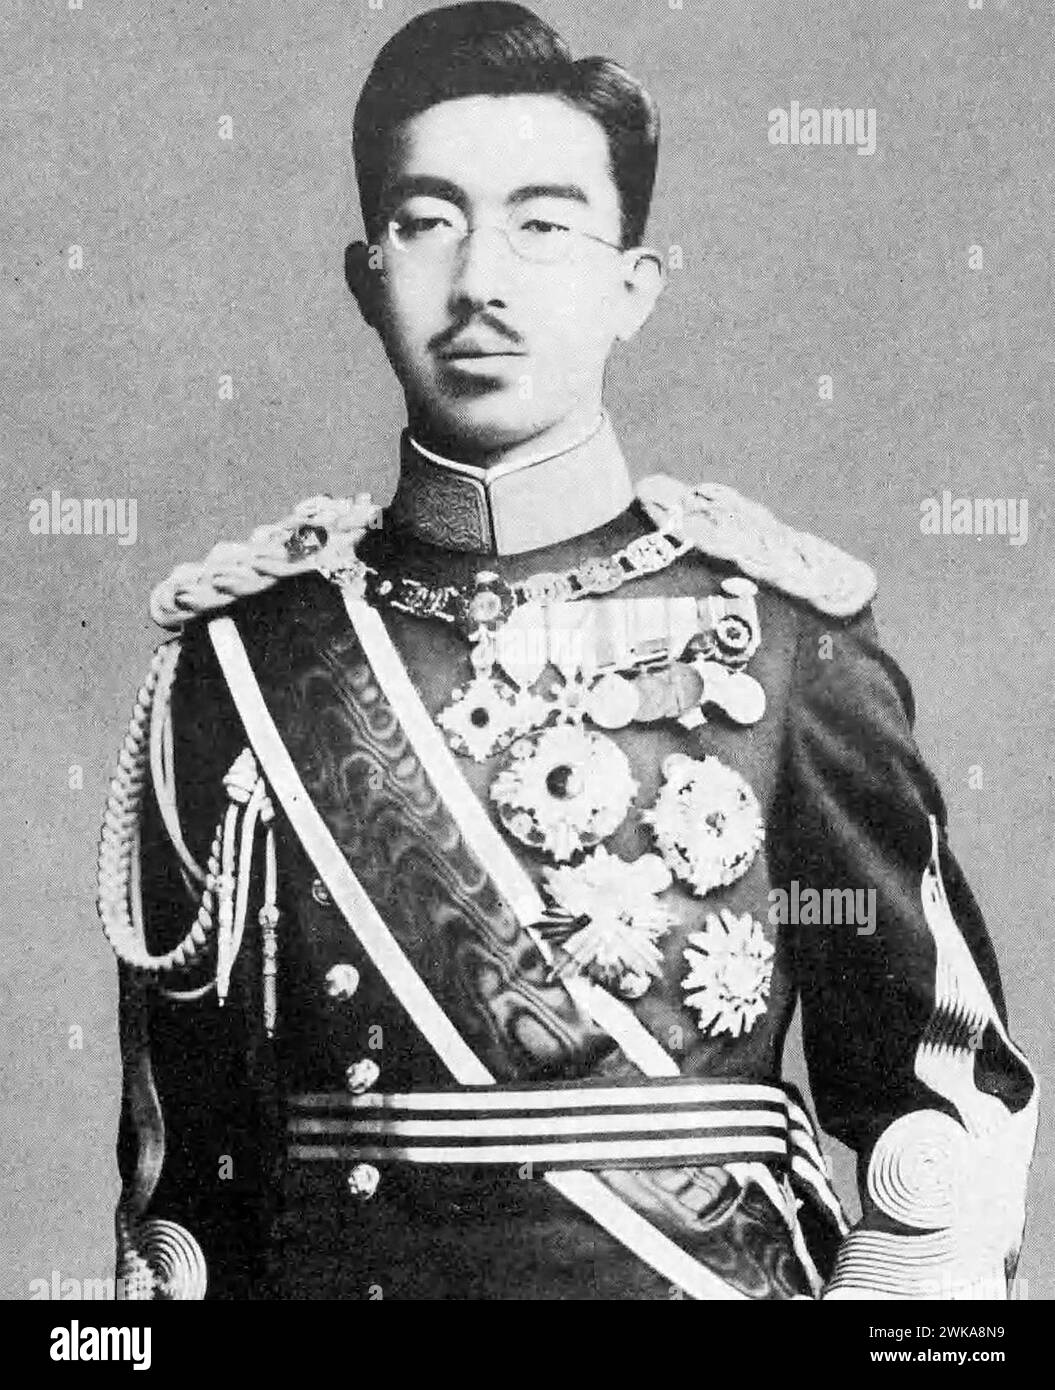 EMPEROOR HIROHITO OF JAPAN (1901-1989) in 1905 Stock Photo